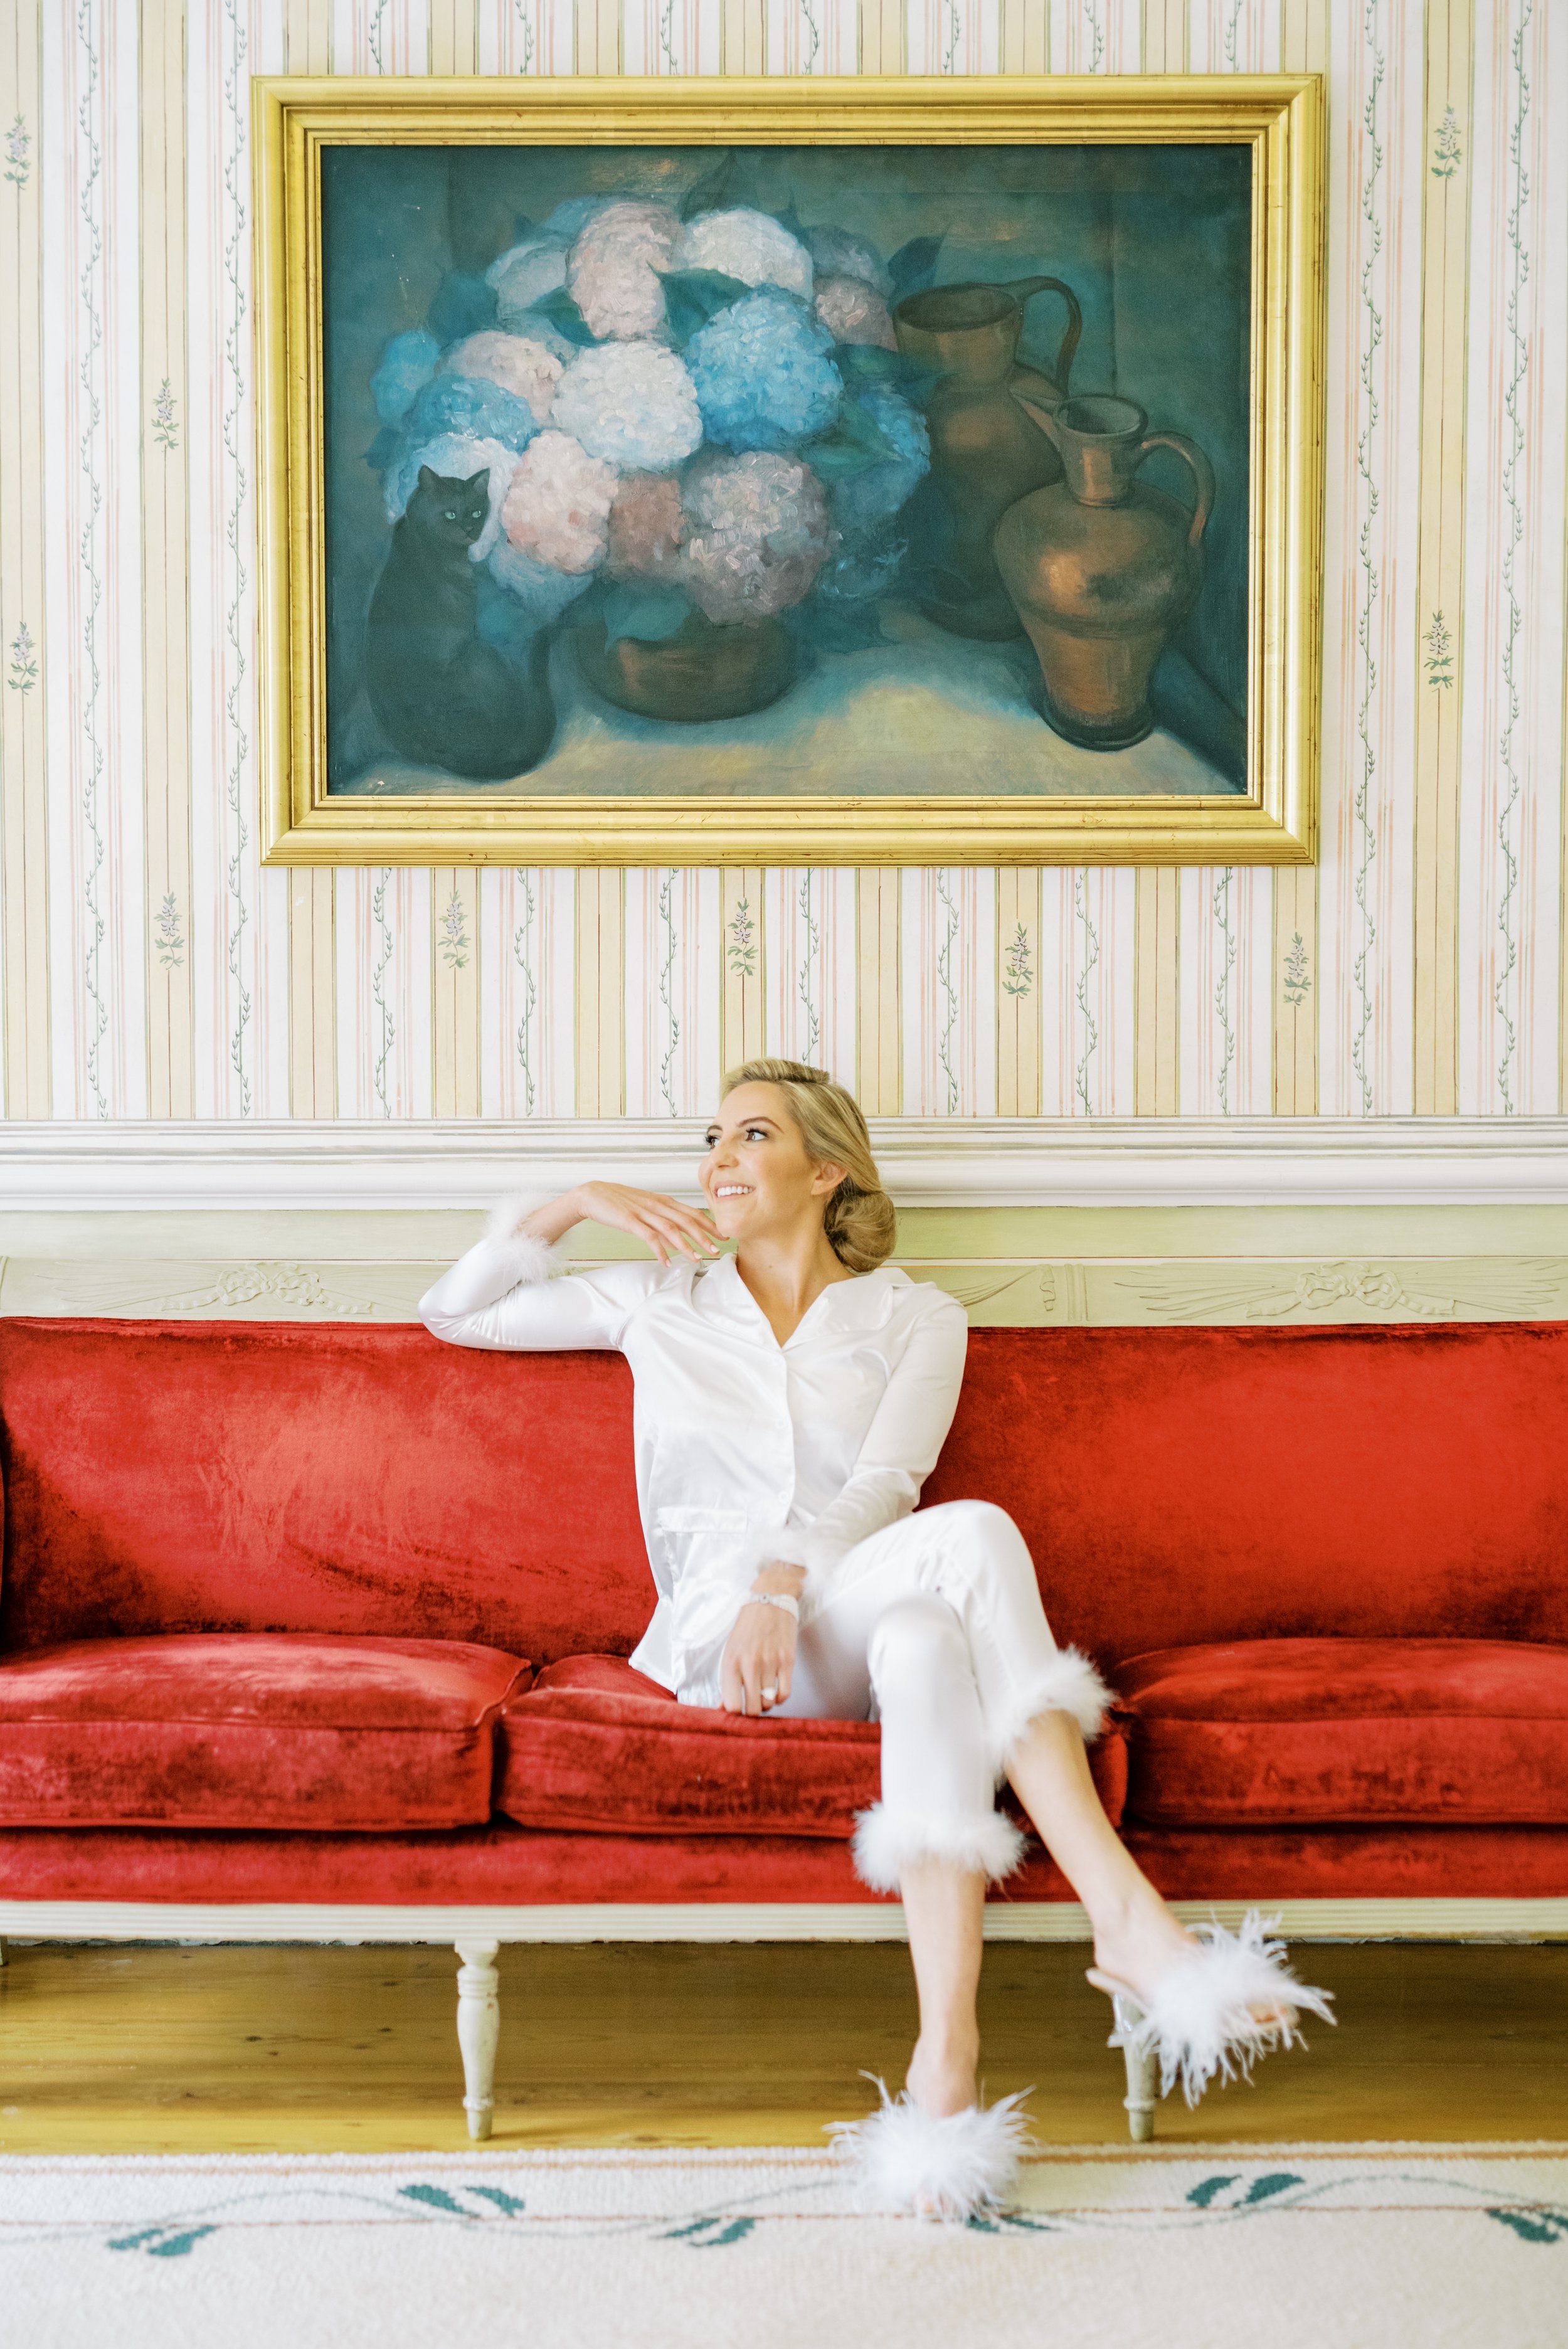 Bride in her white pijamas sitting on a luxurious red velvet sofa and an antique painting behind her